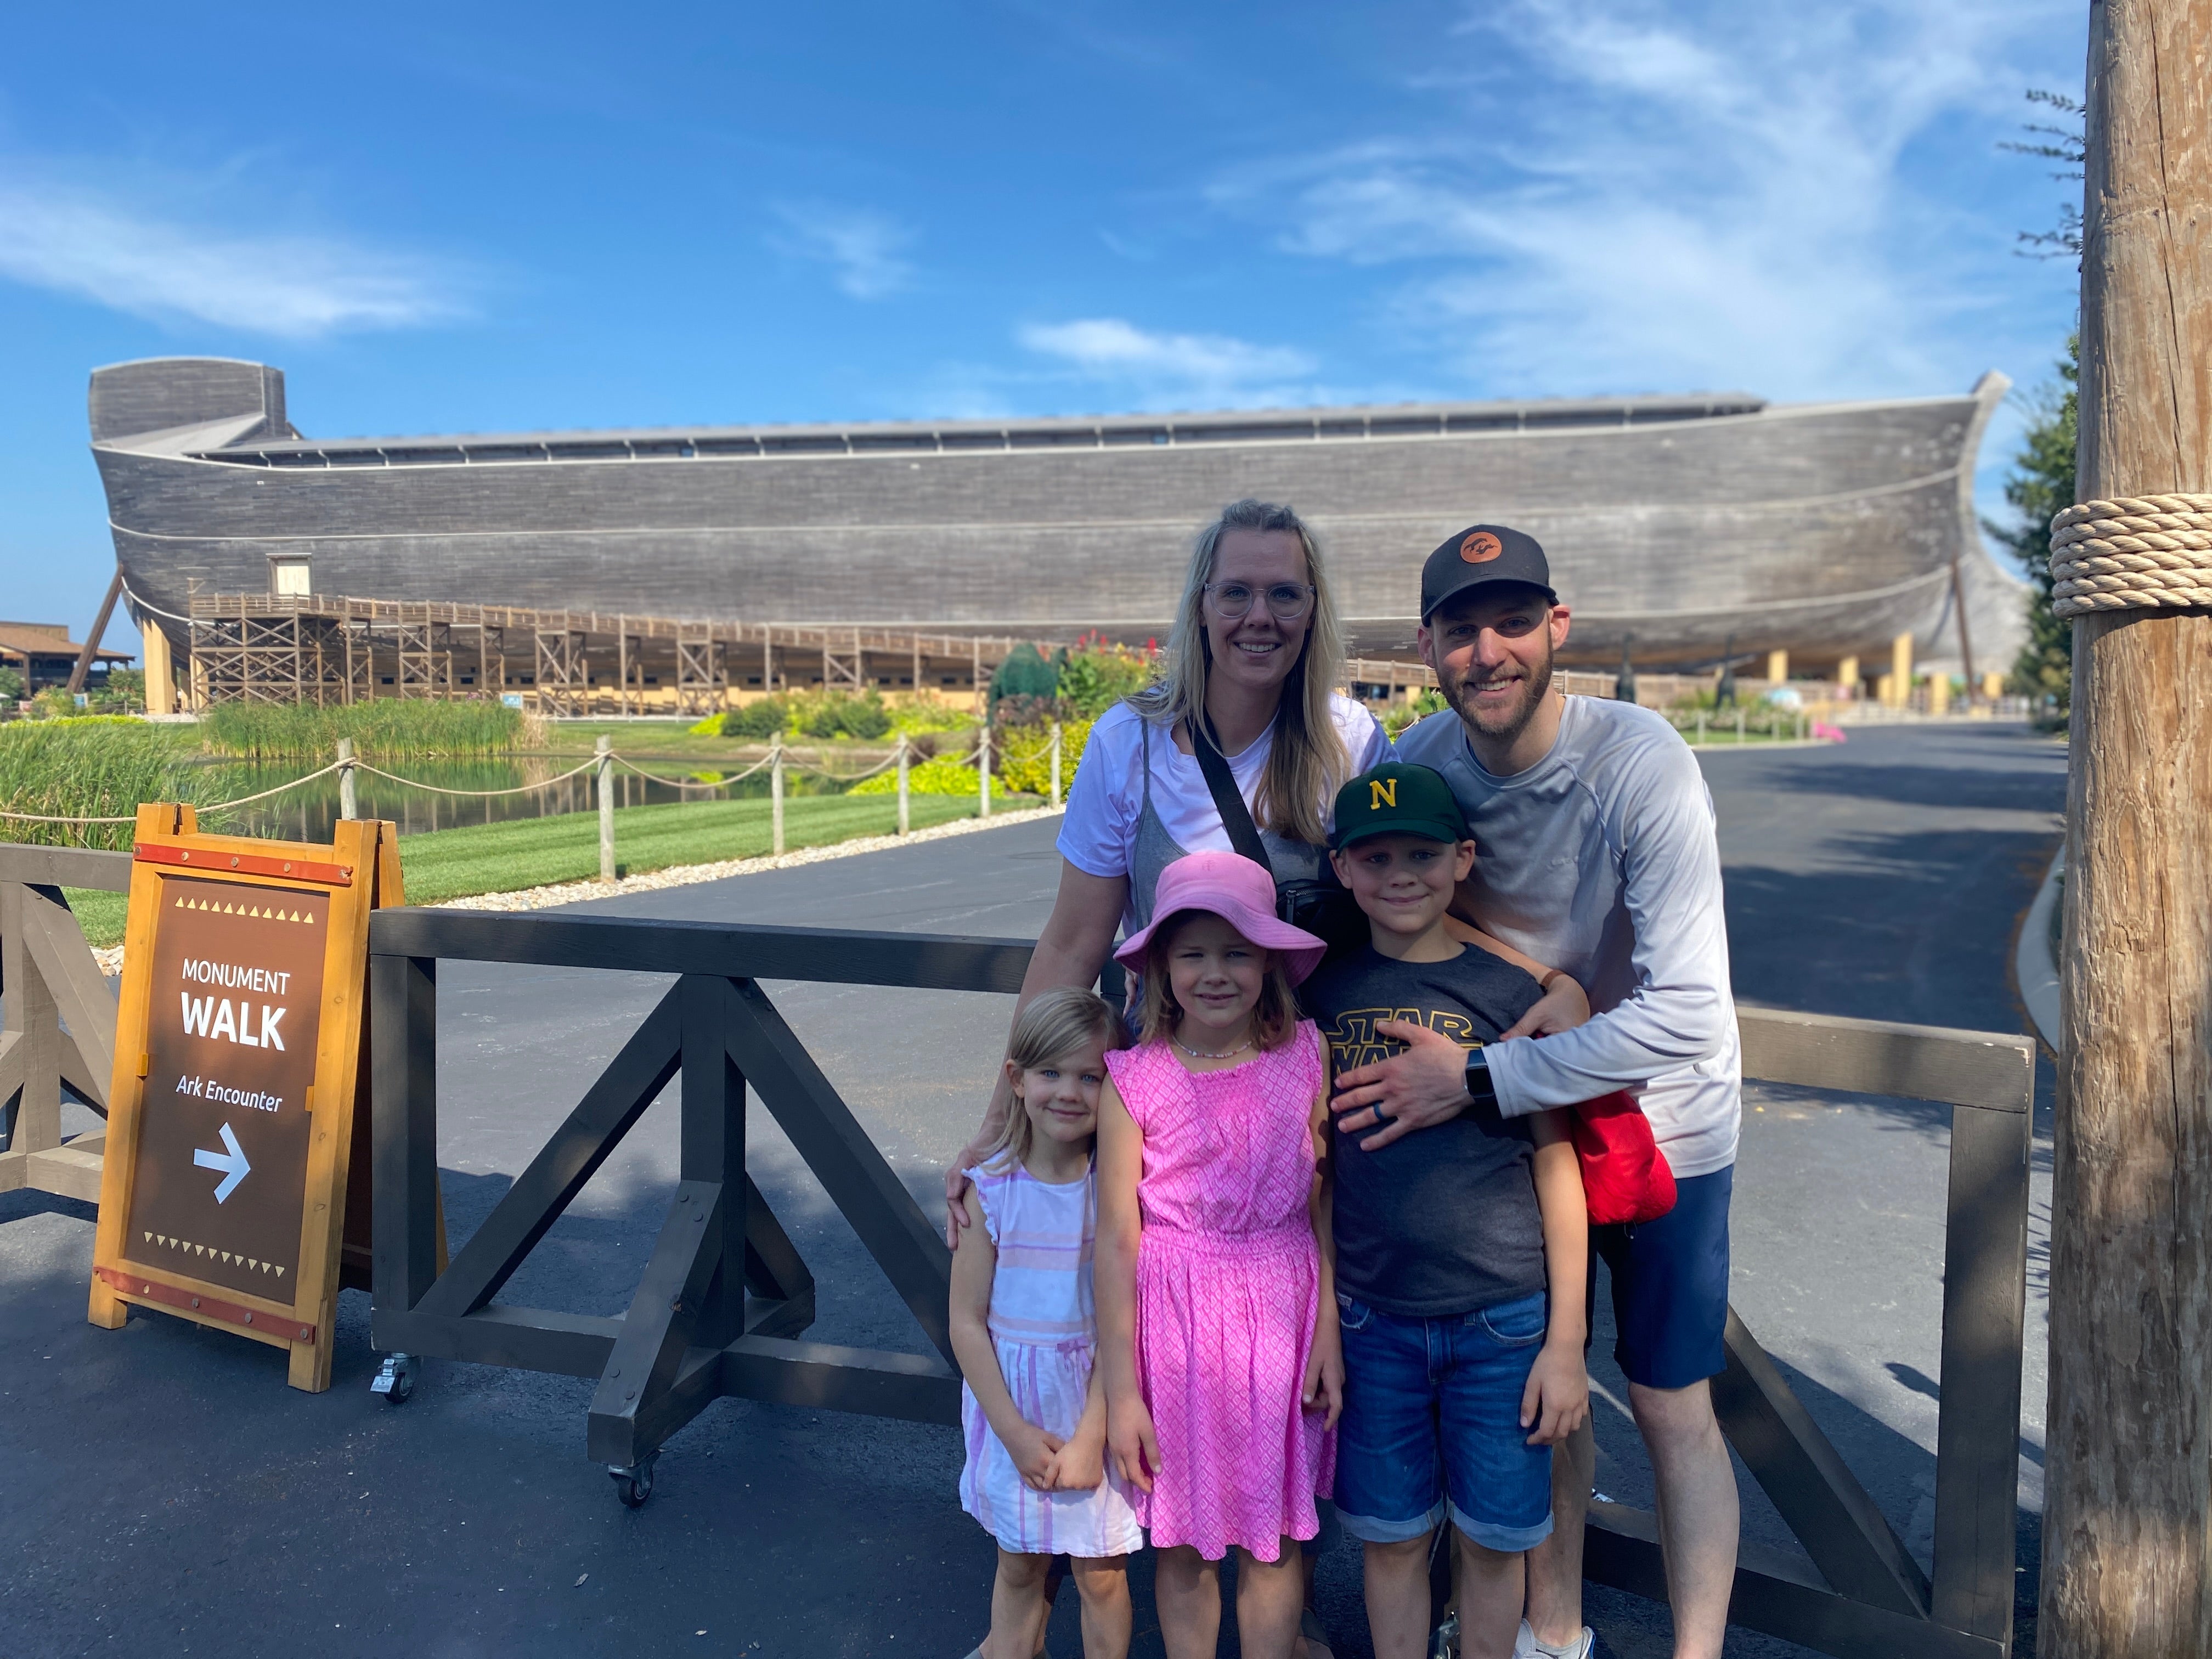 Review of The Ark Encounter & Creation Museum, Part 1